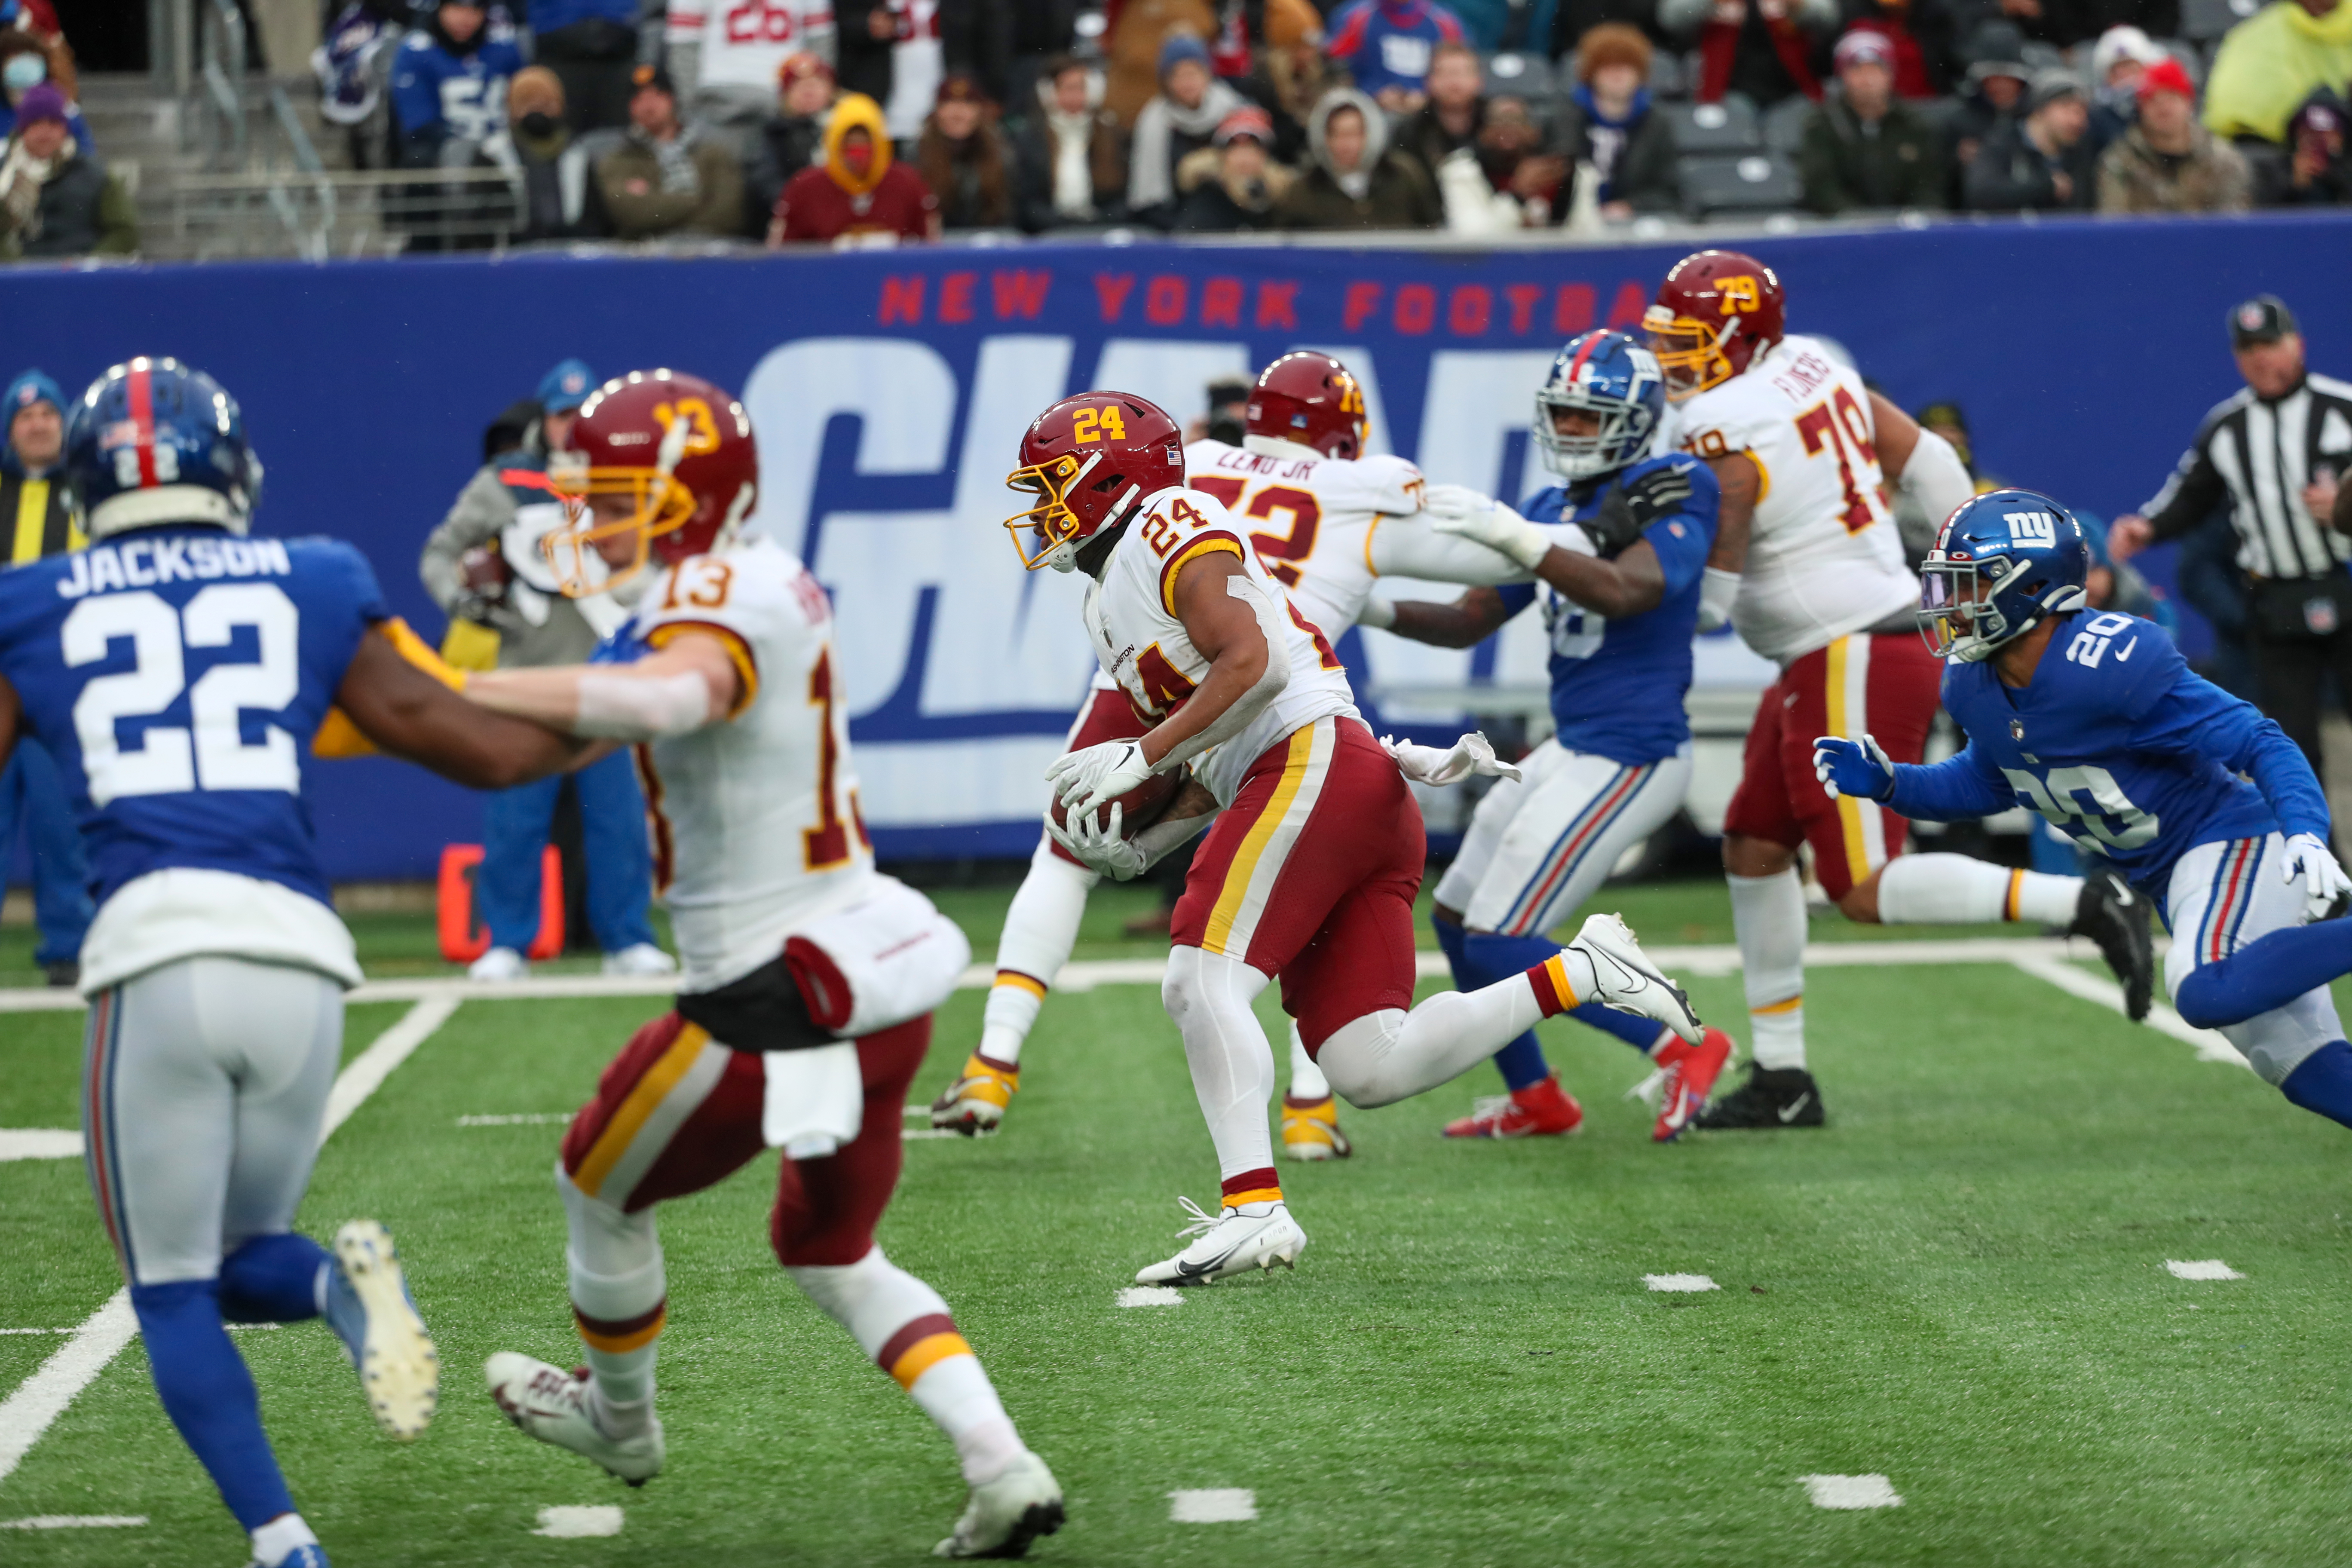 Washington Football Team running back Antonio Gibson (24) scores a rushing touchdown during the fourth quarter against the New York Giants on Sunday, Jan. 9, 2022 in East Rutherford, N.J. Washington won, 22-7.